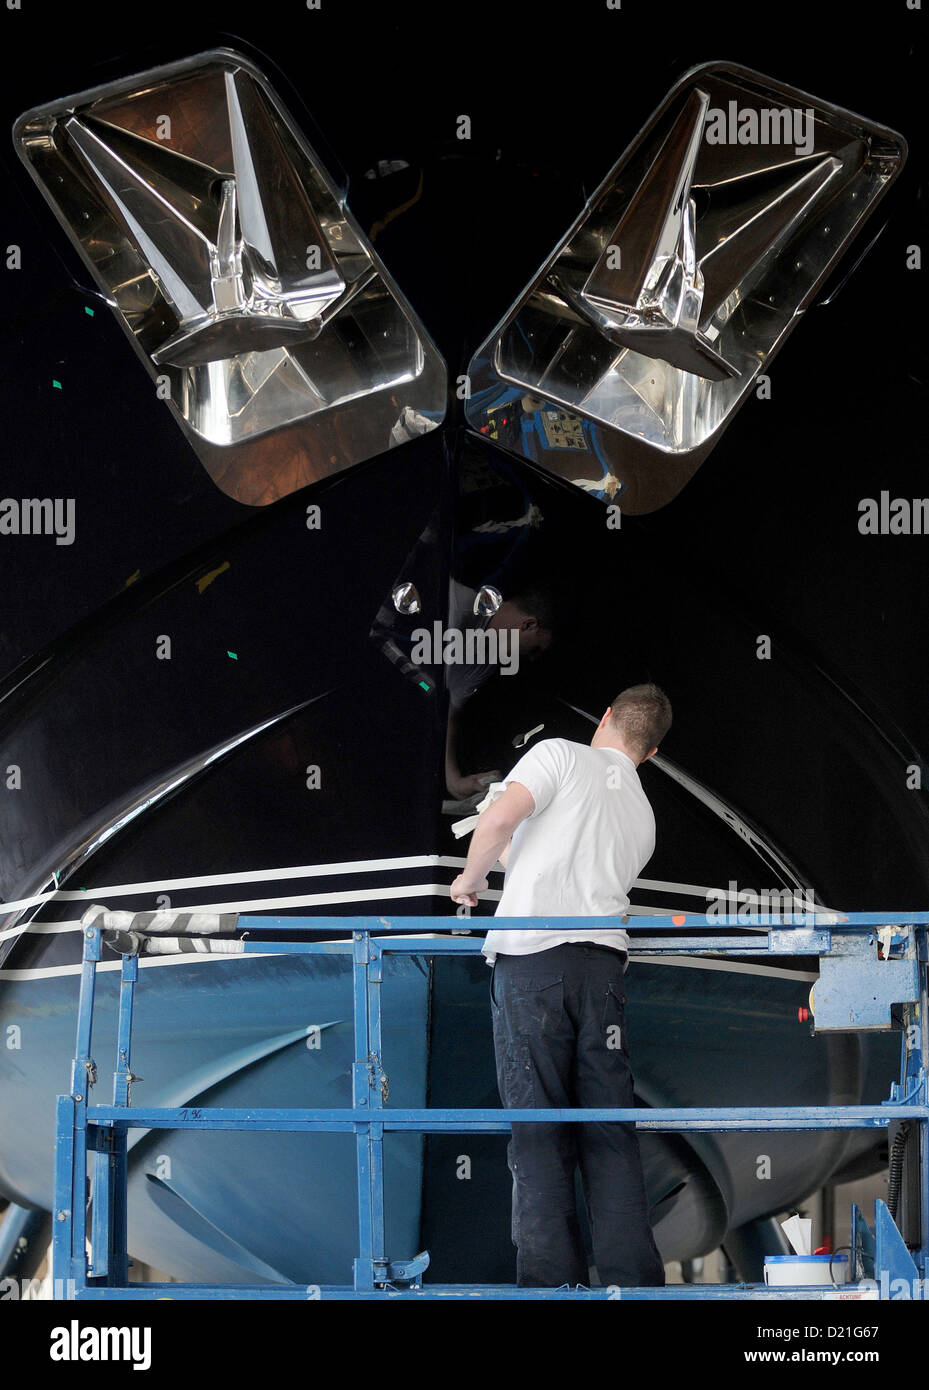 A man cleans the body of a yacht on the fair grounds in Duesseldorf, Germany, 10 January 2013. The 2013 Boat Fair takes place from 19 until 27 January. Photo JONAS GUETTLER Stock Photo